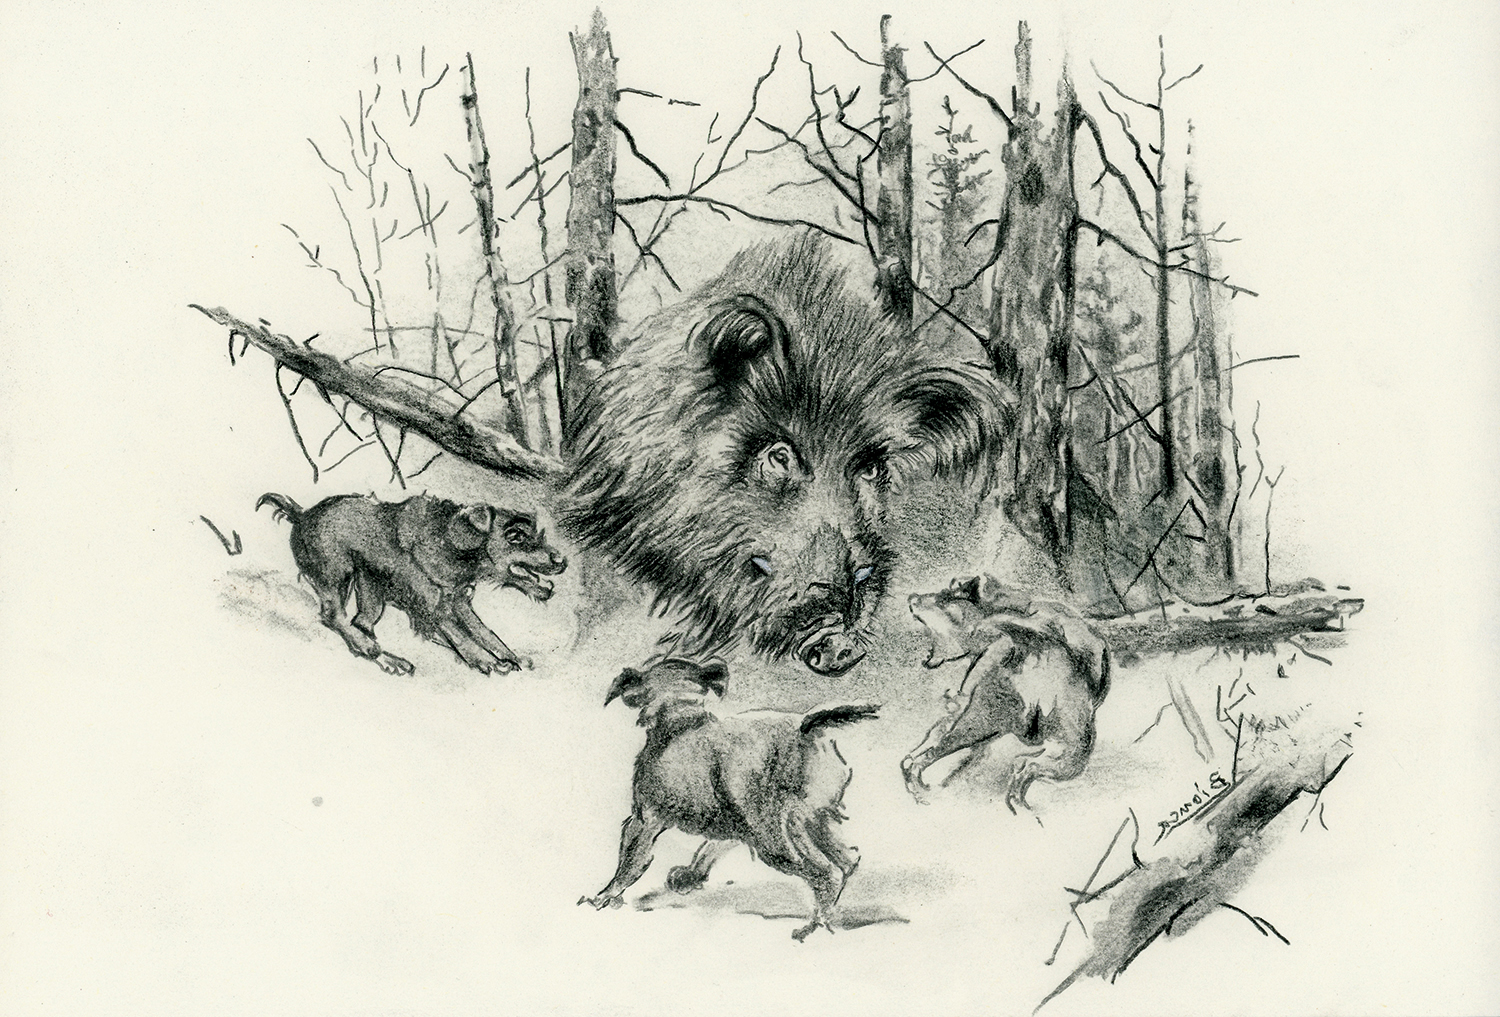 Wild boar and dogs in the forest - pitt pencil - CafeArtStudio